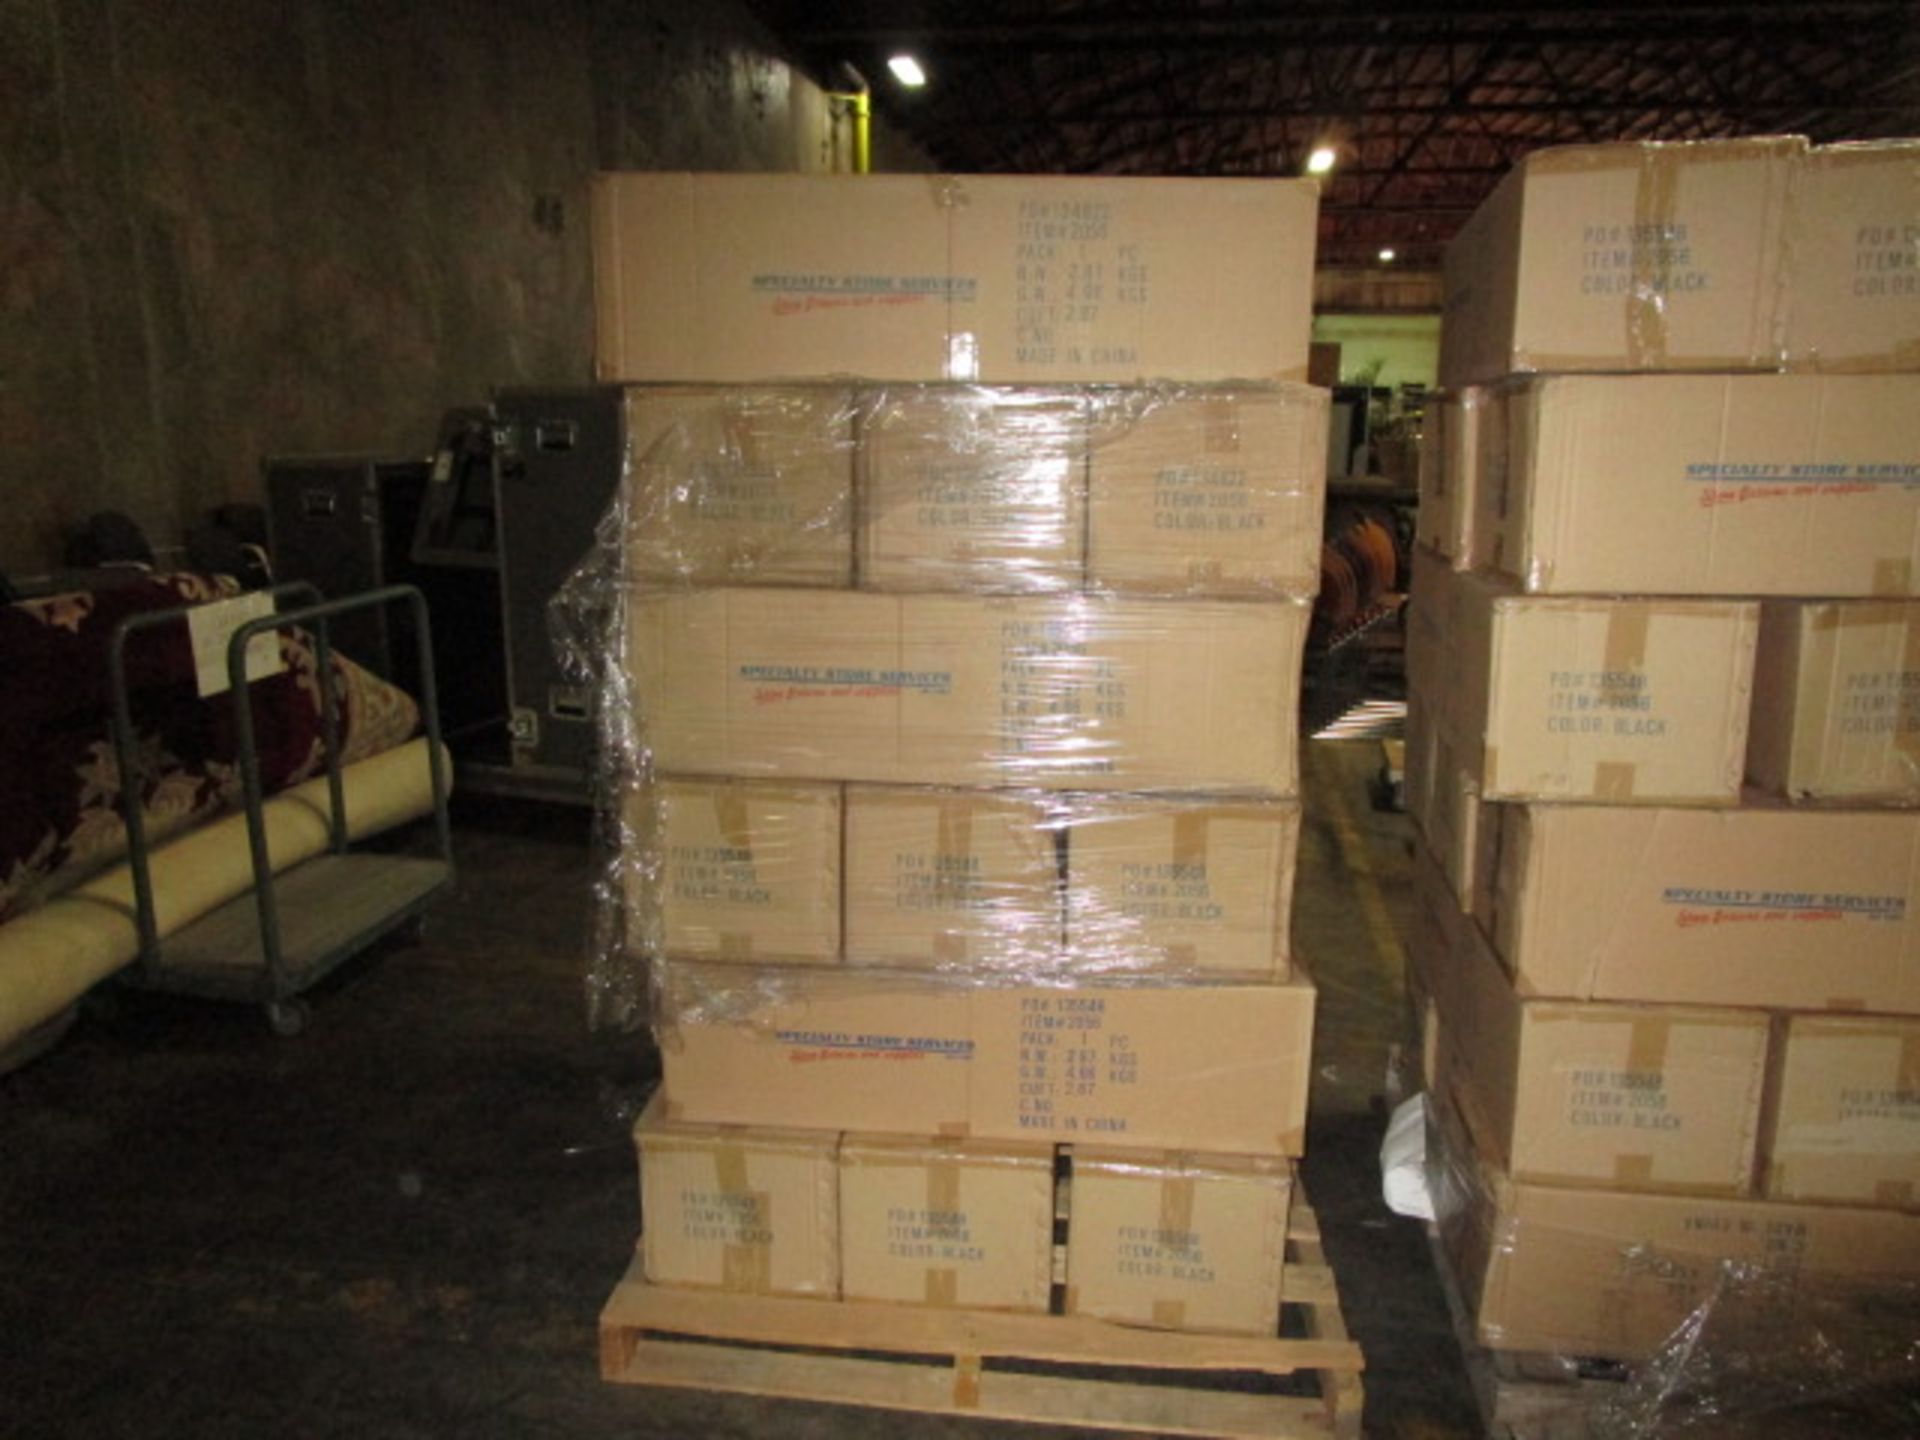 PALLET CONTAINING CONTENTS OF MAGAZINE RACKS